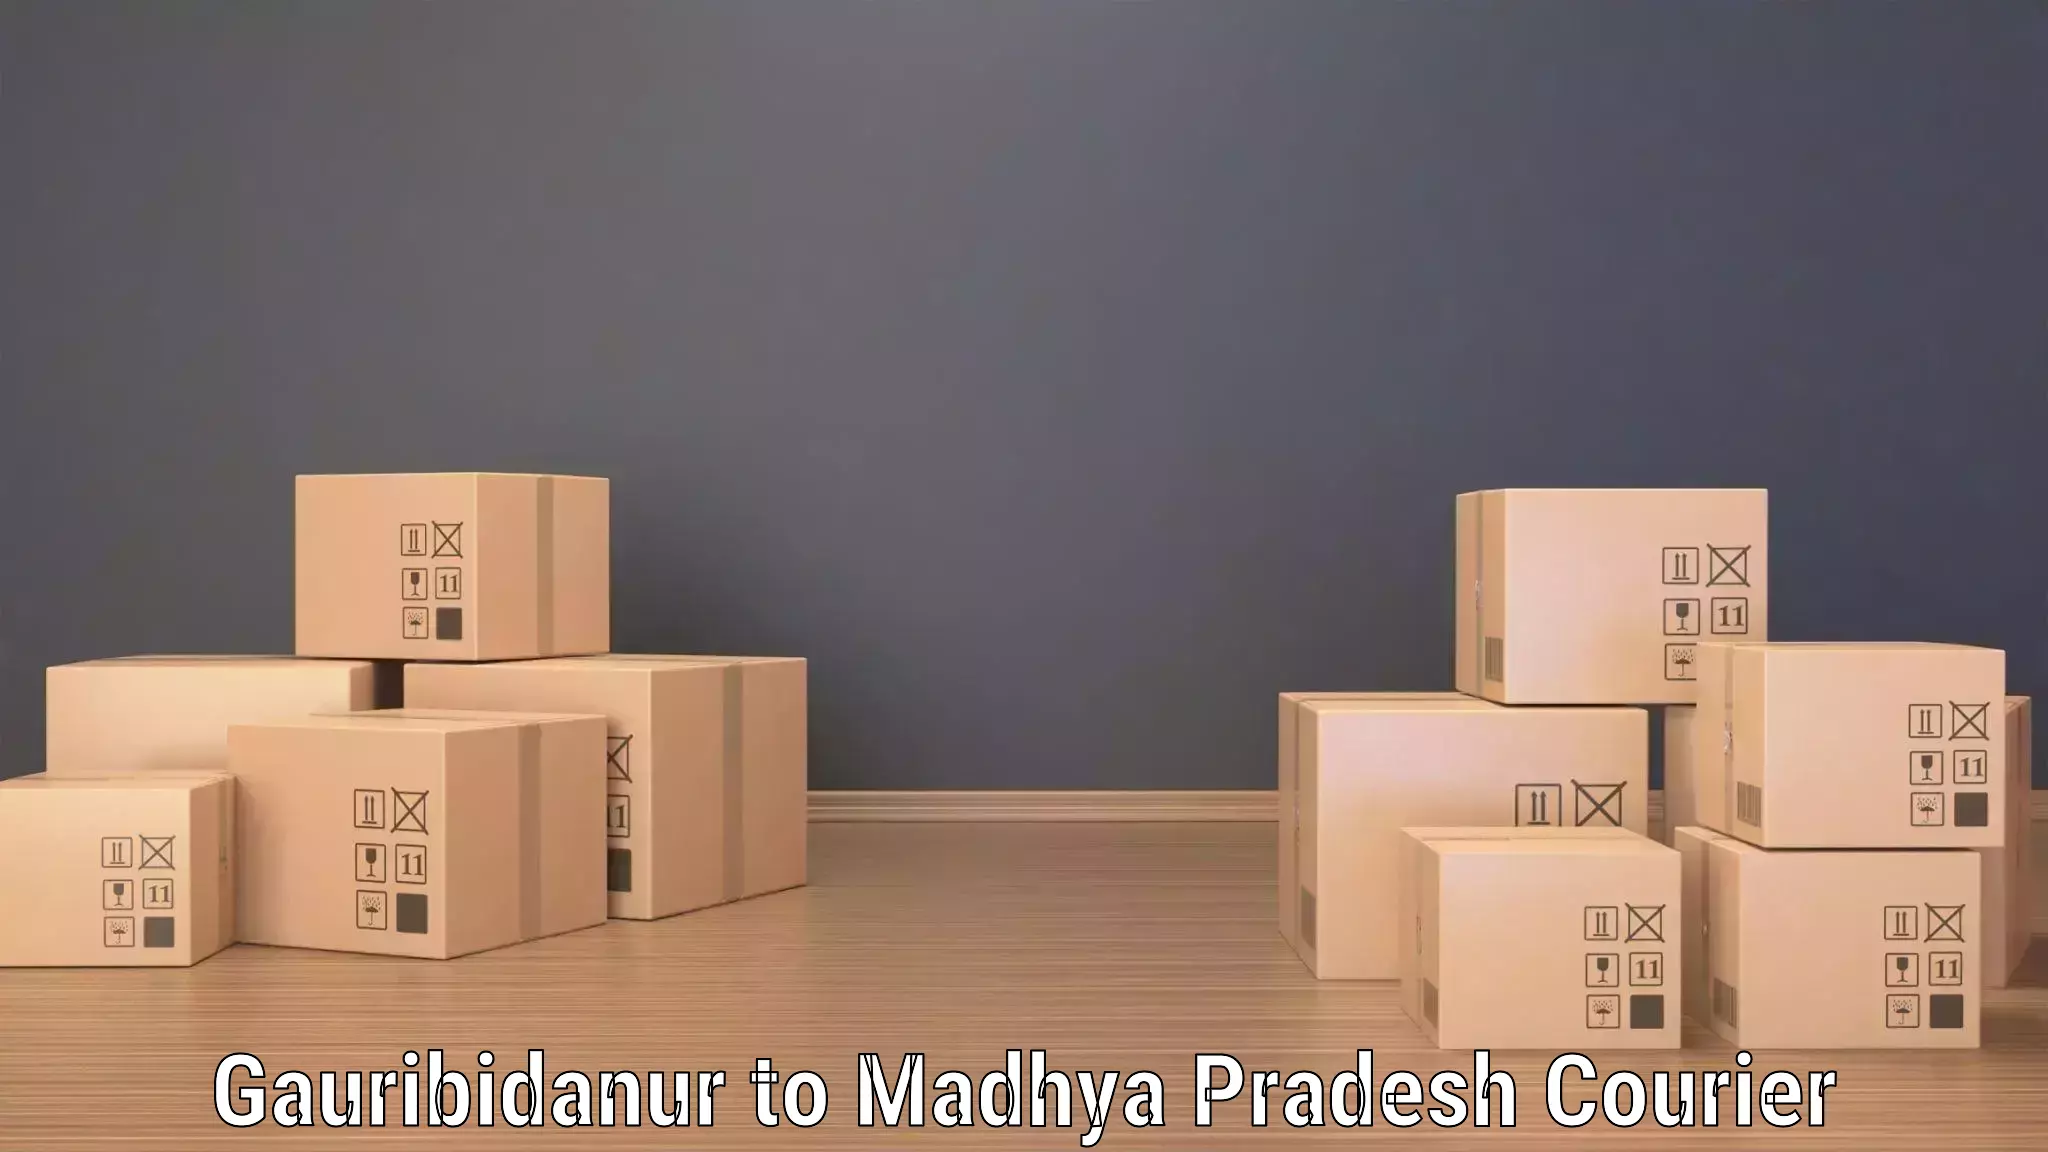 Express delivery solutions in Gauribidanur to Nalkheda